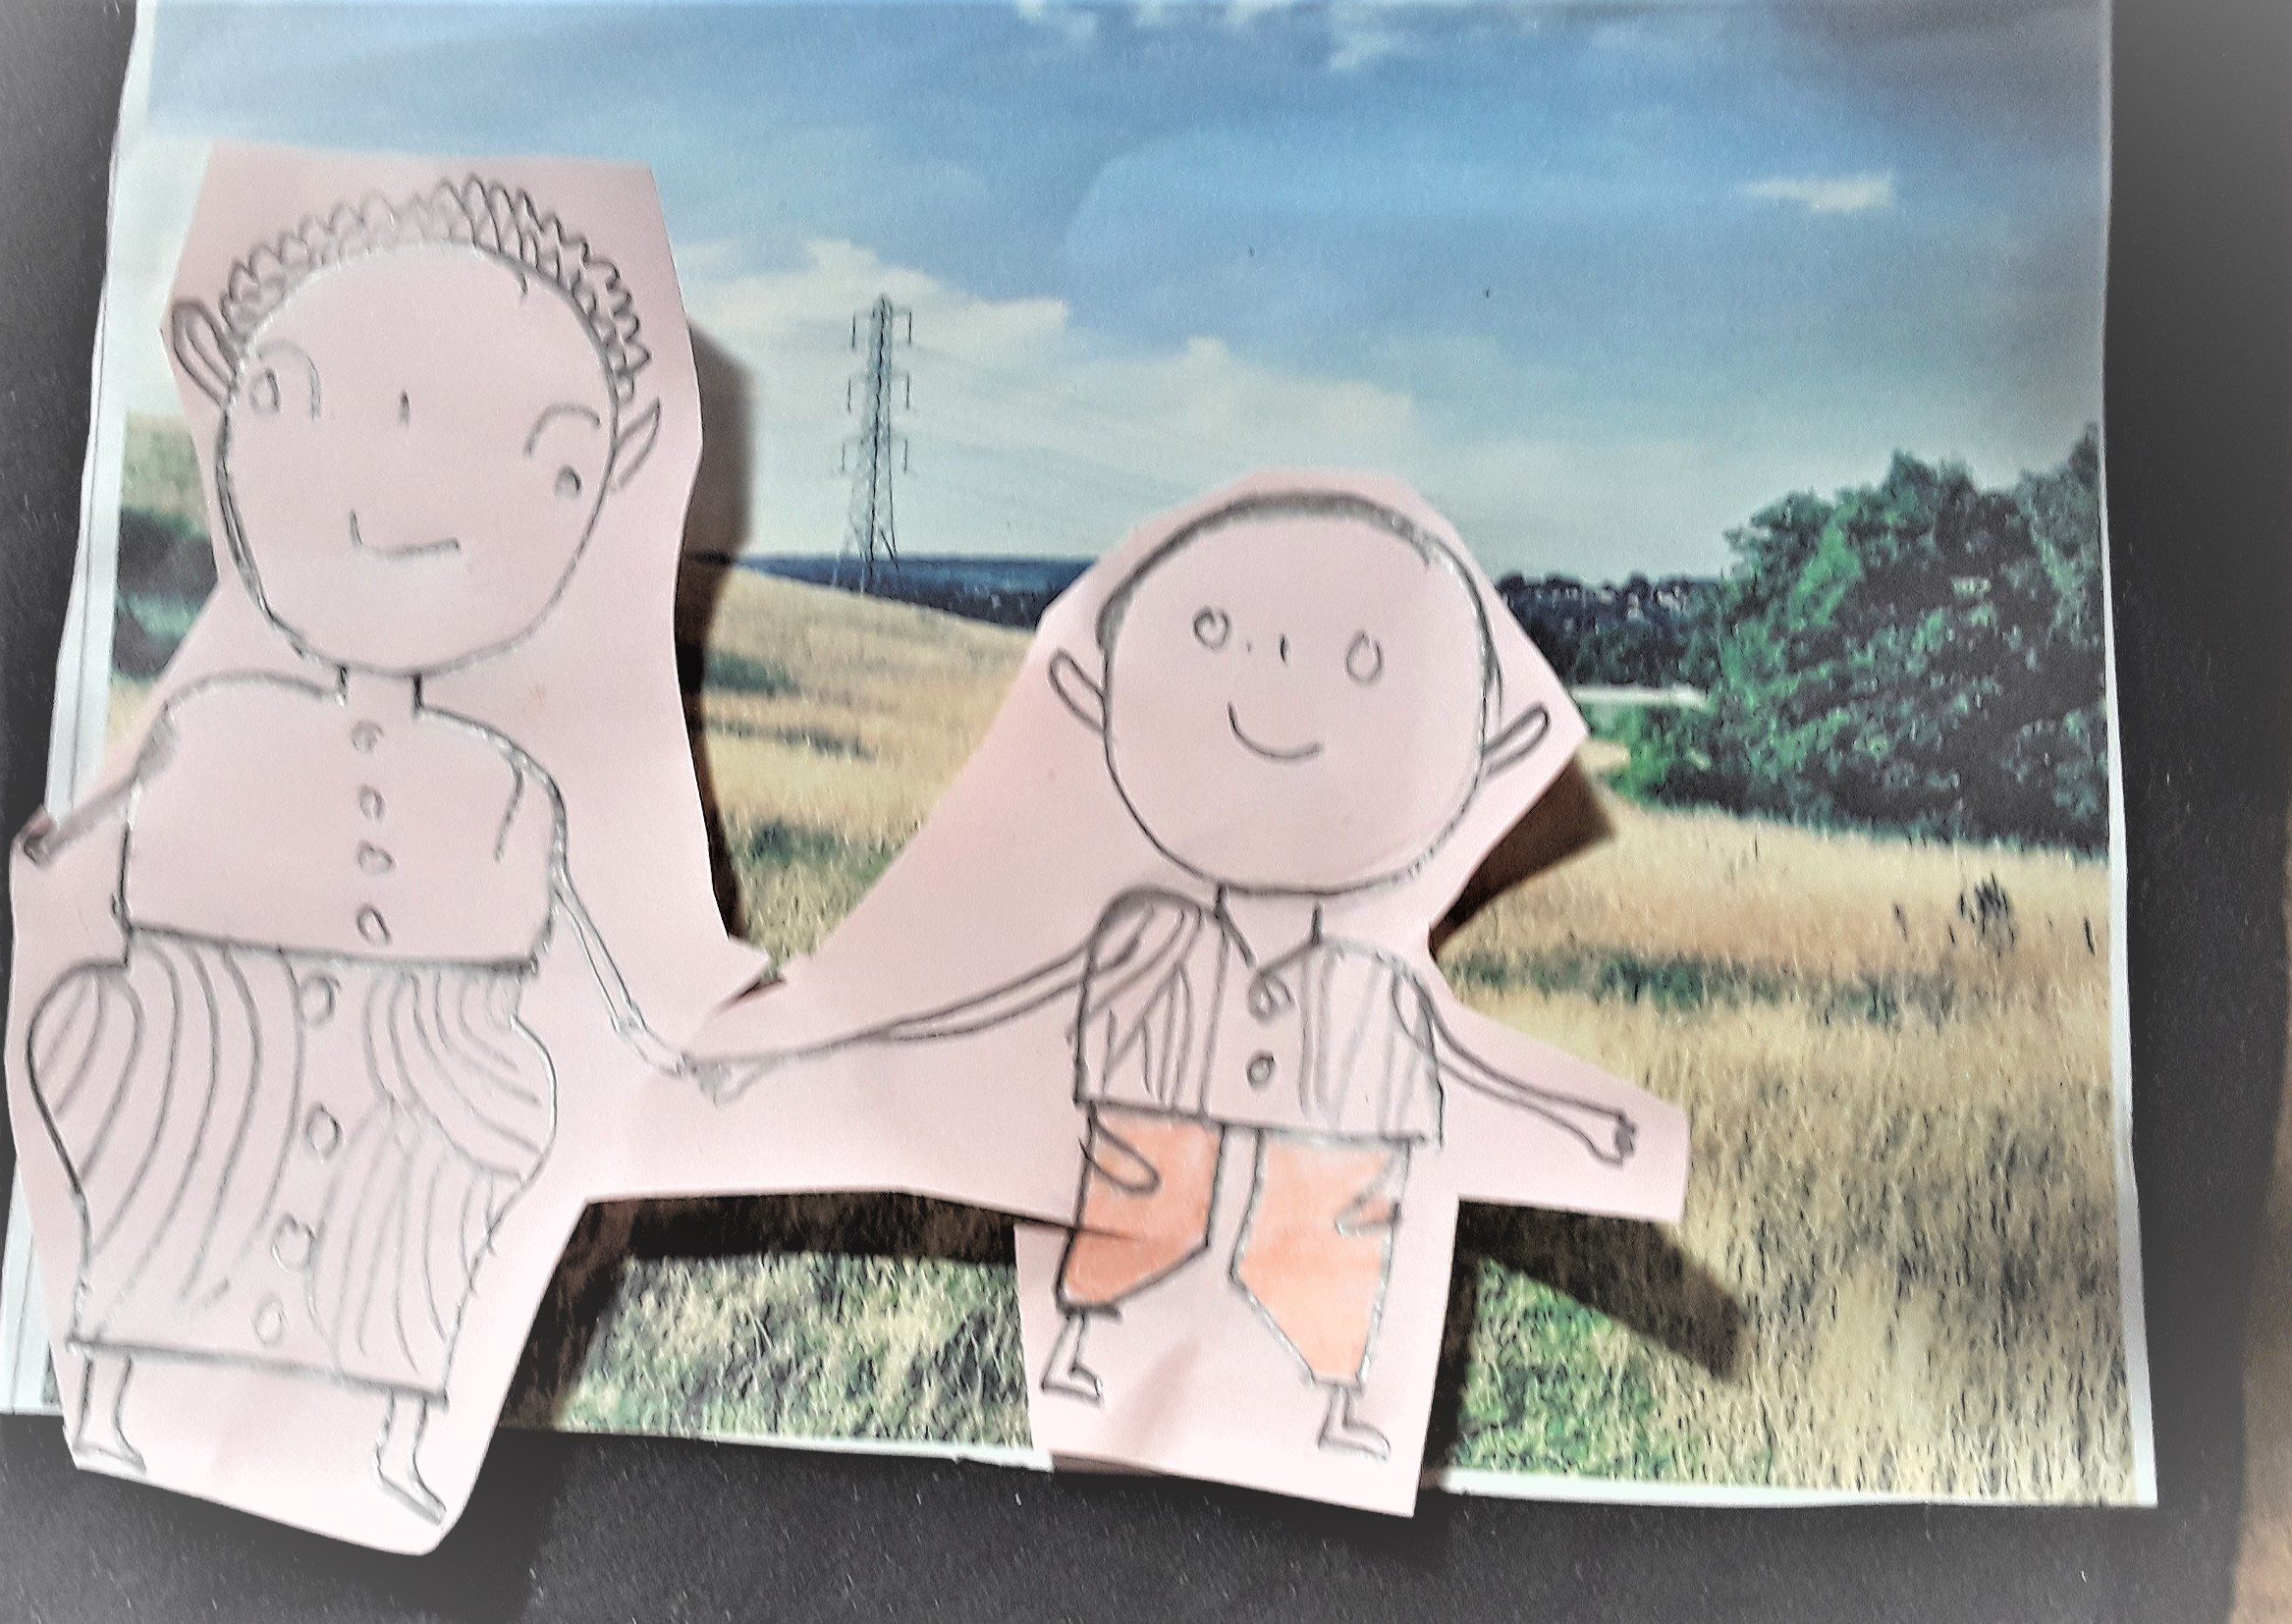 A cut out of a child's drawing of person on top of a photo of fields and a pylon